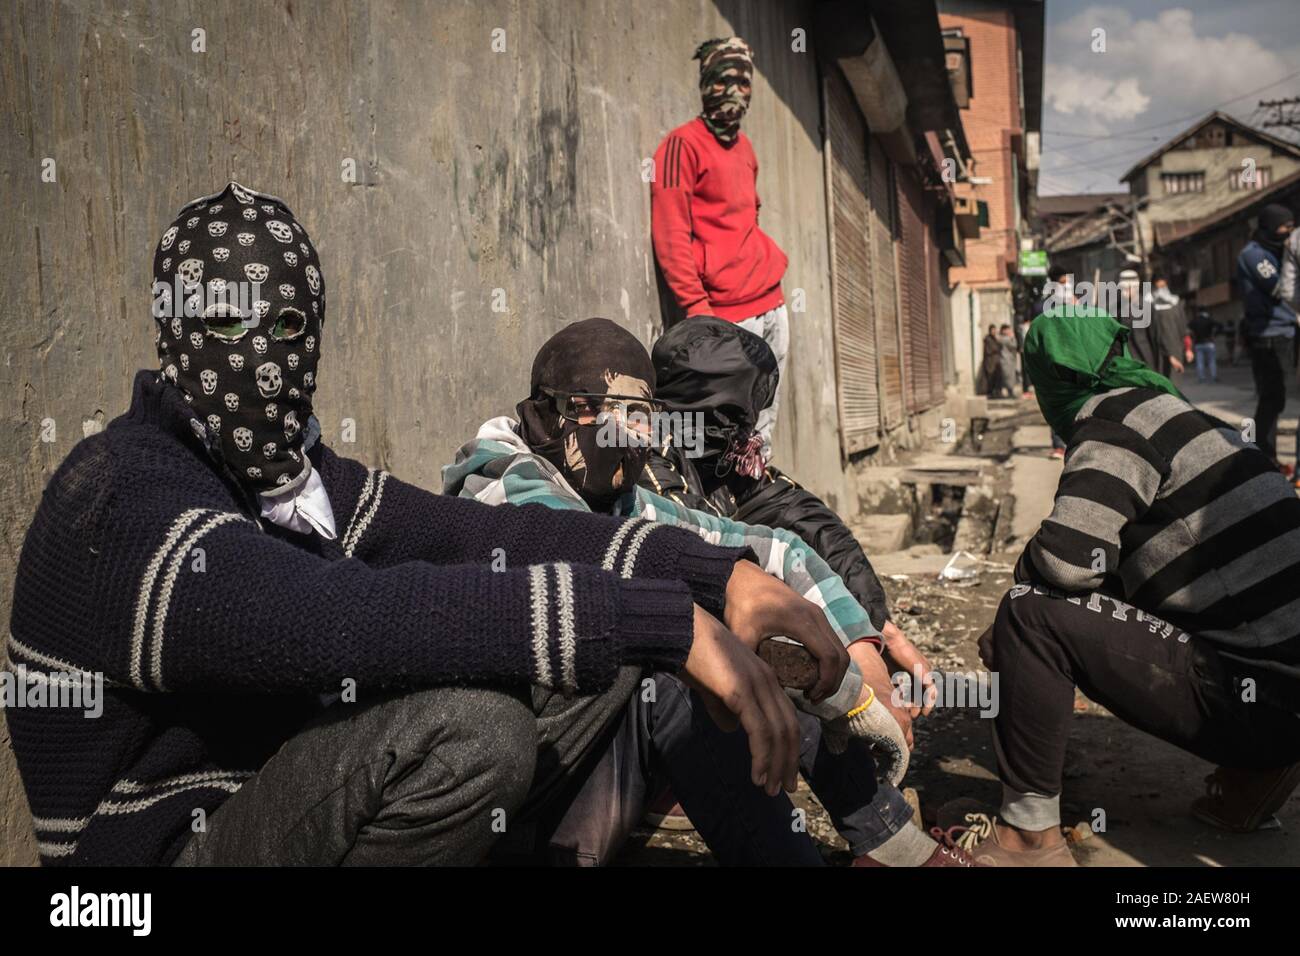 kashmir stone pelters sitting on streets Stock Photo